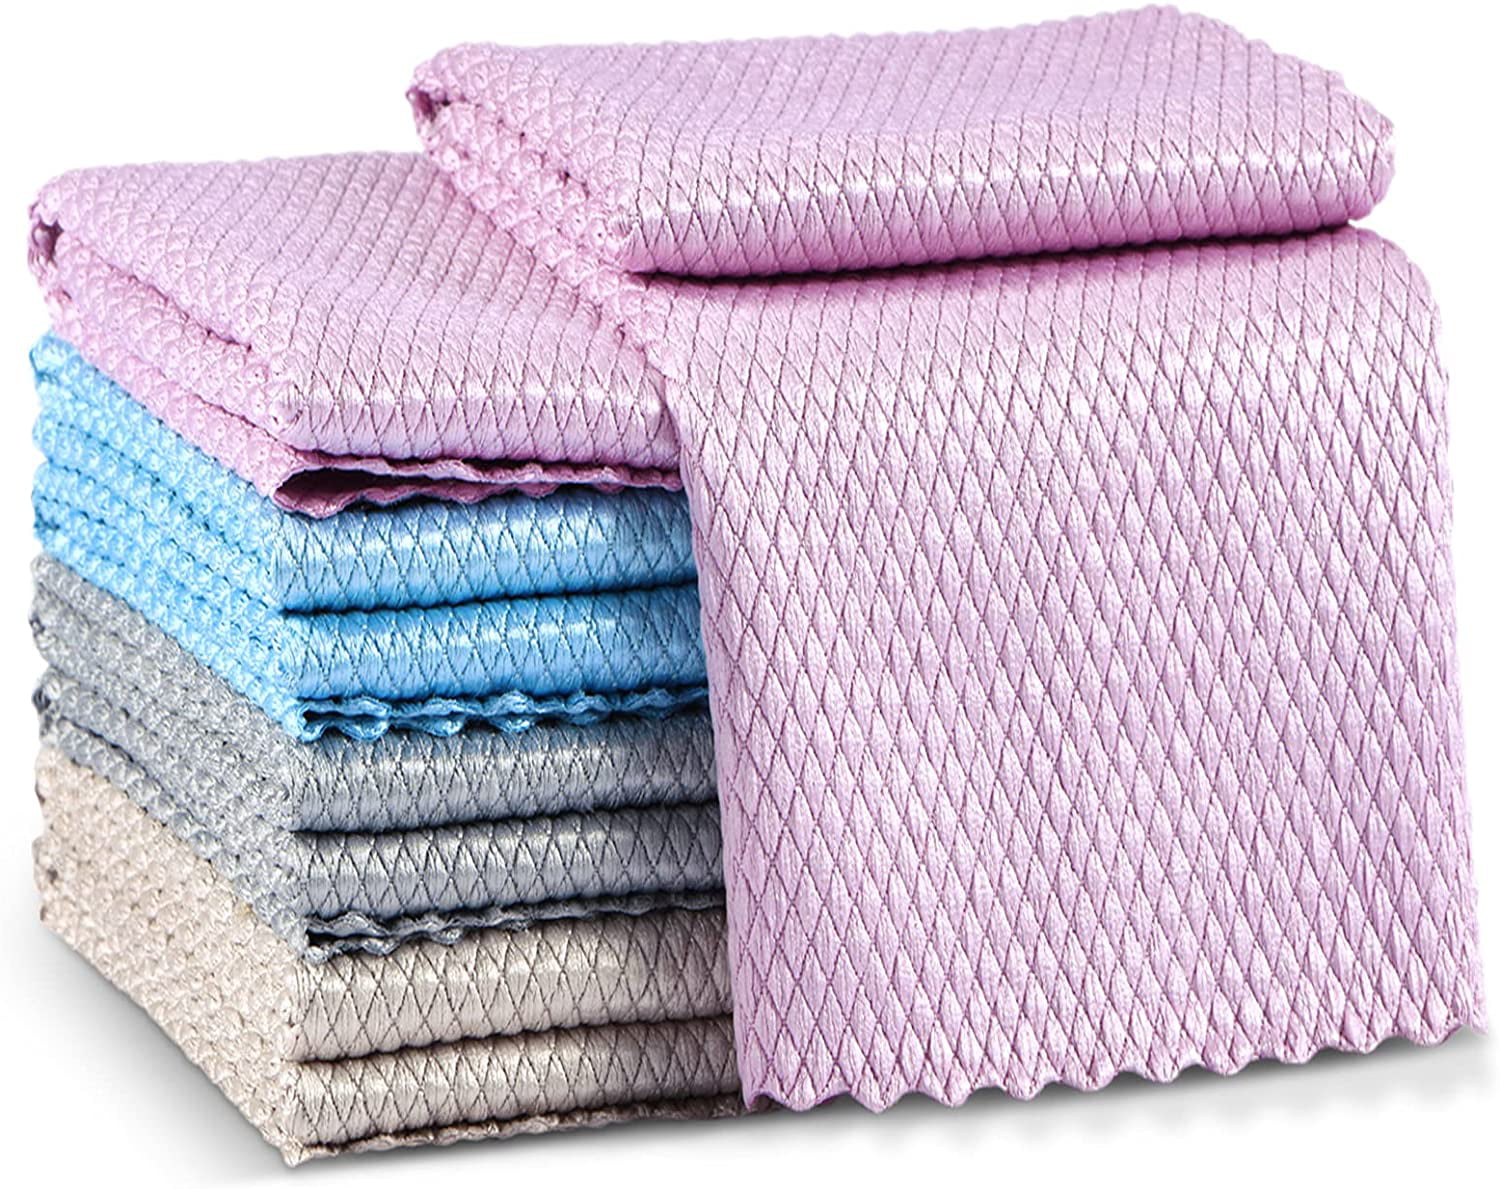 Highly Absorbent Streak-Free Reusable Cloths for Glass Dishes Nanoscale Cleaning Cloth Car Lint Free Easycleanco Cloth 8 Pack Fish Scale Microfiber Polishing Cleaning Cloth Windows Mirrors 